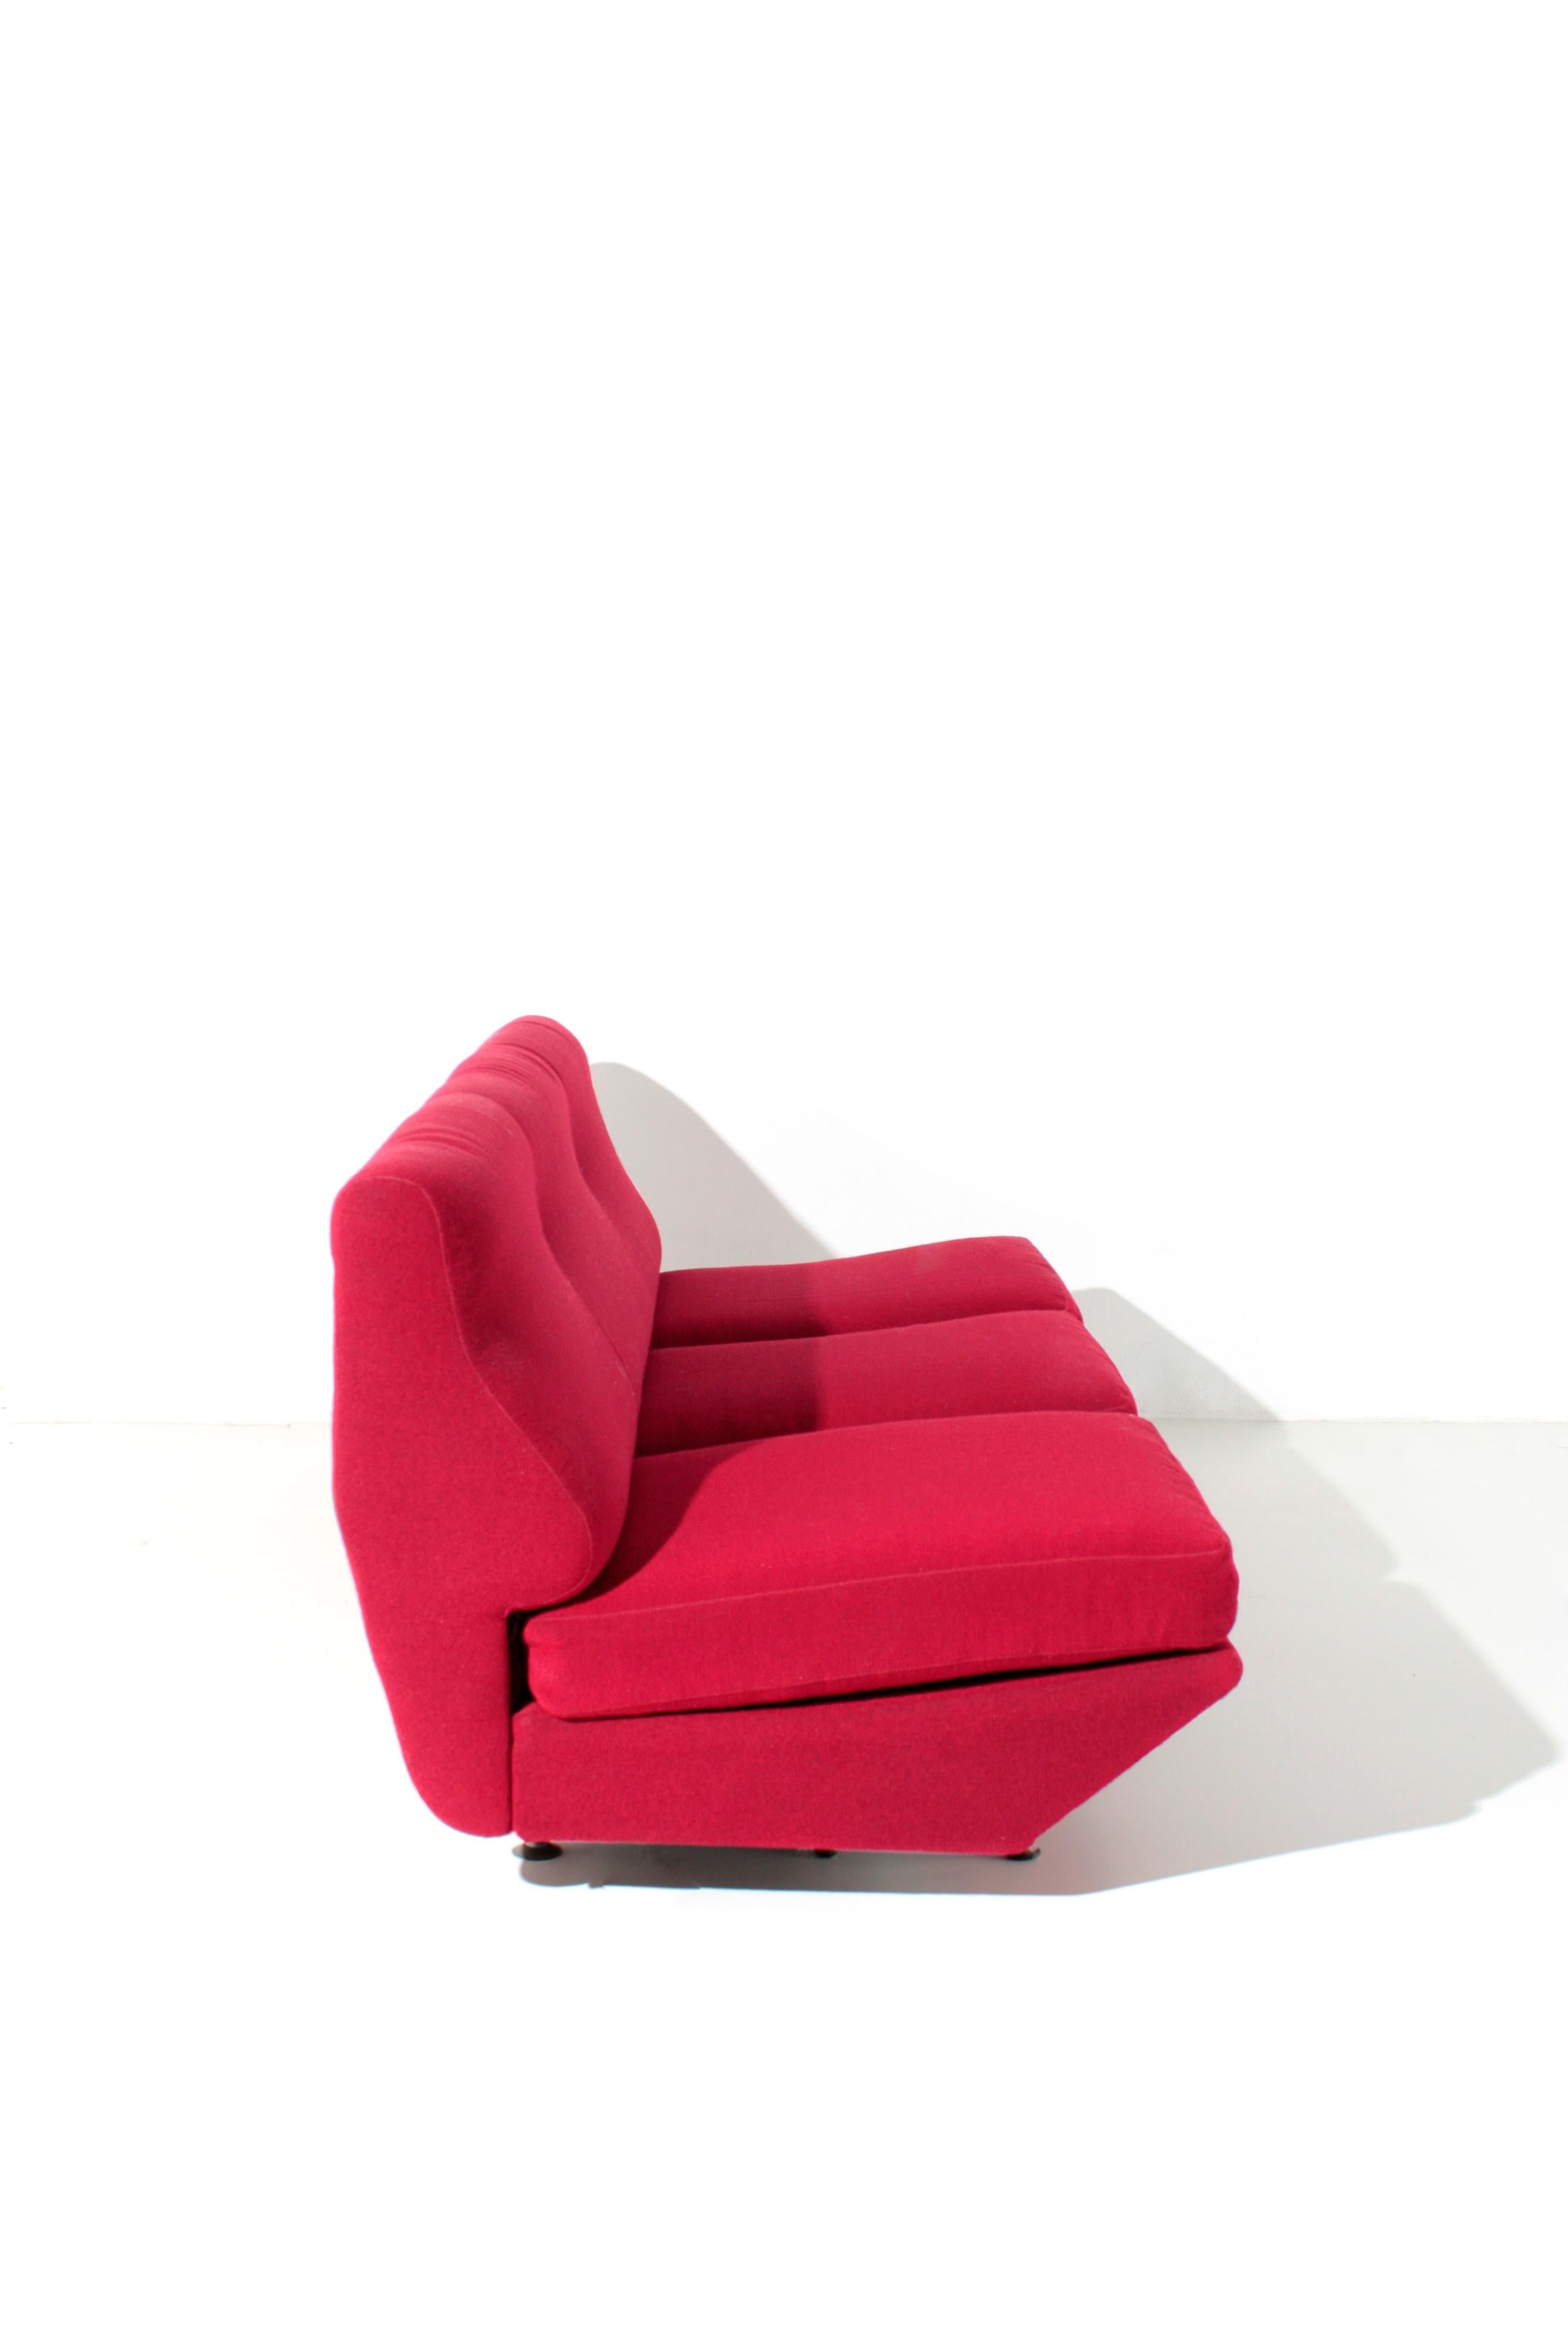 Marco Zanuso Sleep-o-Matic Midcentury Sofa Bed in Red Fabric, 1954 In Good Condition In Milano, IT